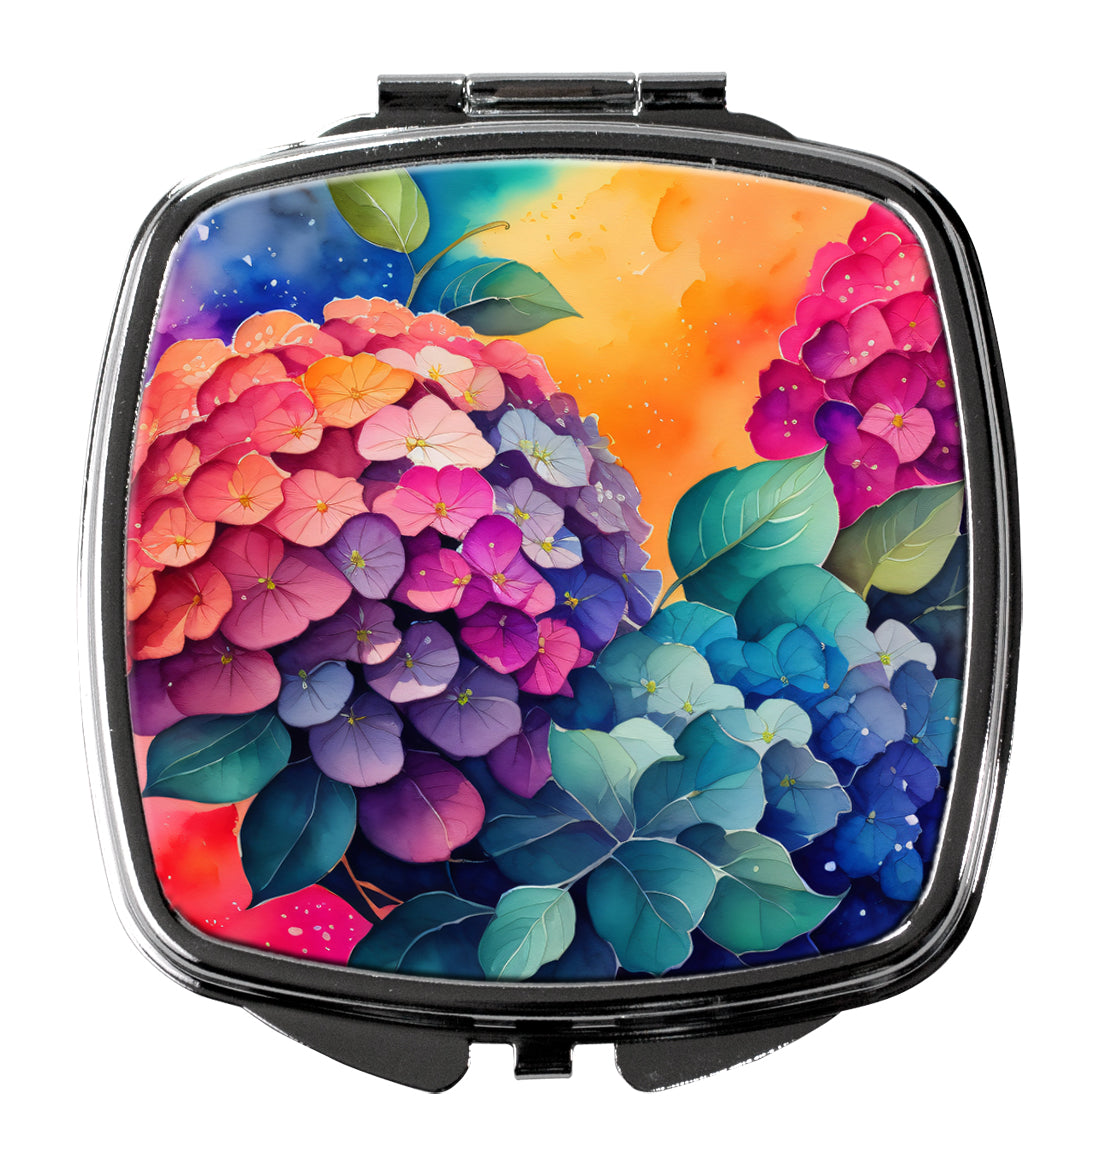 Buy this Colorful Hydrangeas Compact Mirror